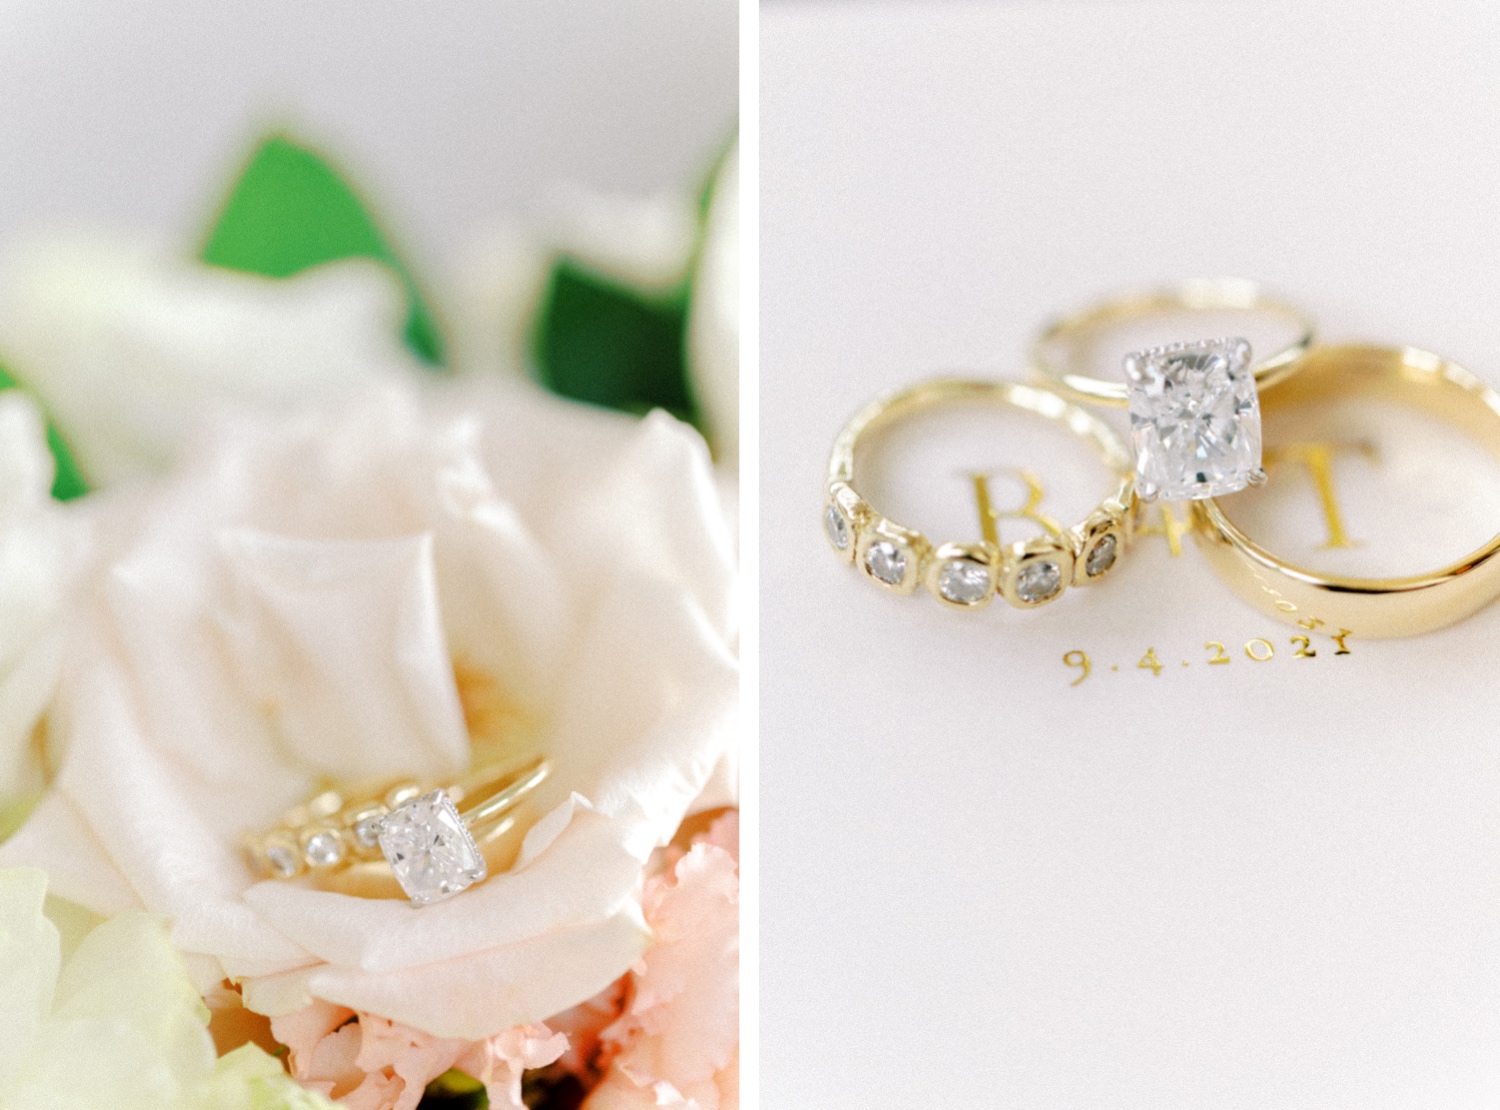 Wedding bands and florals by Kasey D Weddings for Abeja Winery and Inn Wedding